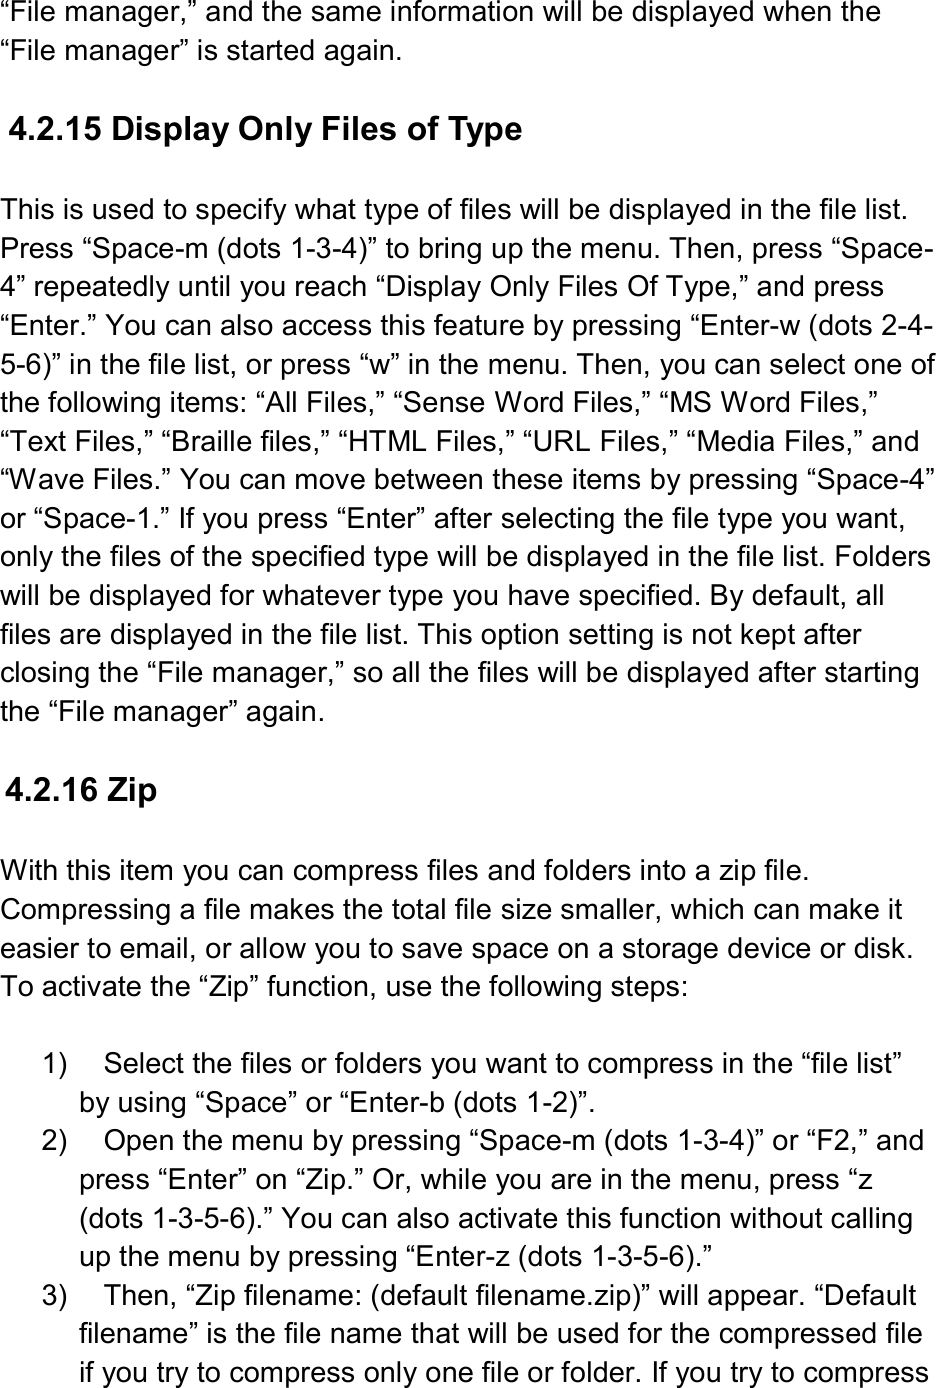  “File manager,” and the same information will be displayed when the “File manager” is started again.  4.2.15 Display Only Files of Type  This is used to specify what type of files will be displayed in the file list. Press “Space-m (dots 1-3-4)” to bring up the menu. Then, press “Space-4” repeatedly until you reach “Display Only Files Of Type,” and press “Enter.” You can also access this feature by pressing “Enter-w (dots 2-4-5-6)” in the file list, or press “w” in the menu. Then, you can select one of the following items: “All Files,” “Sense Word Files,” “MS Word Files,” “Text Files,” “Braille files,” “HTML Files,” “URL Files,” “Media Files,” and “Wave Files.” You can move between these items by pressing “Space-4” or “Space-1.” If you press “Enter” after selecting the file type you want, only the files of the specified type will be displayed in the file list. Folders will be displayed for whatever type you have specified. By default, all files are displayed in the file list. This option setting is not kept after closing the “File manager,” so all the files will be displayed after starting the “File manager” again.  4.2.16 Zip  With this item you can compress files and folders into a zip file. Compressing a file makes the total file size smaller, which can make it easier to email, or allow you to save space on a storage device or disk. To activate the “Zip” function, use the following steps:  1)  Select the files or folders you want to compress in the “file list” by using “Space” or “Enter-b (dots 1-2)”. 2)  Open the menu by pressing “Space-m (dots 1-3-4)” or “F2,” and press “Enter” on “Zip.” Or, while you are in the menu, press “z (dots 1-3-5-6).” You can also activate this function without calling up the menu by pressing “Enter-z (dots 1-3-5-6).” 3)  Then, “Zip filename: (default filename.zip)” will appear. “Default filename” is the file name that will be used for the compressed file if you try to compress only one file or folder. If you try to compress 